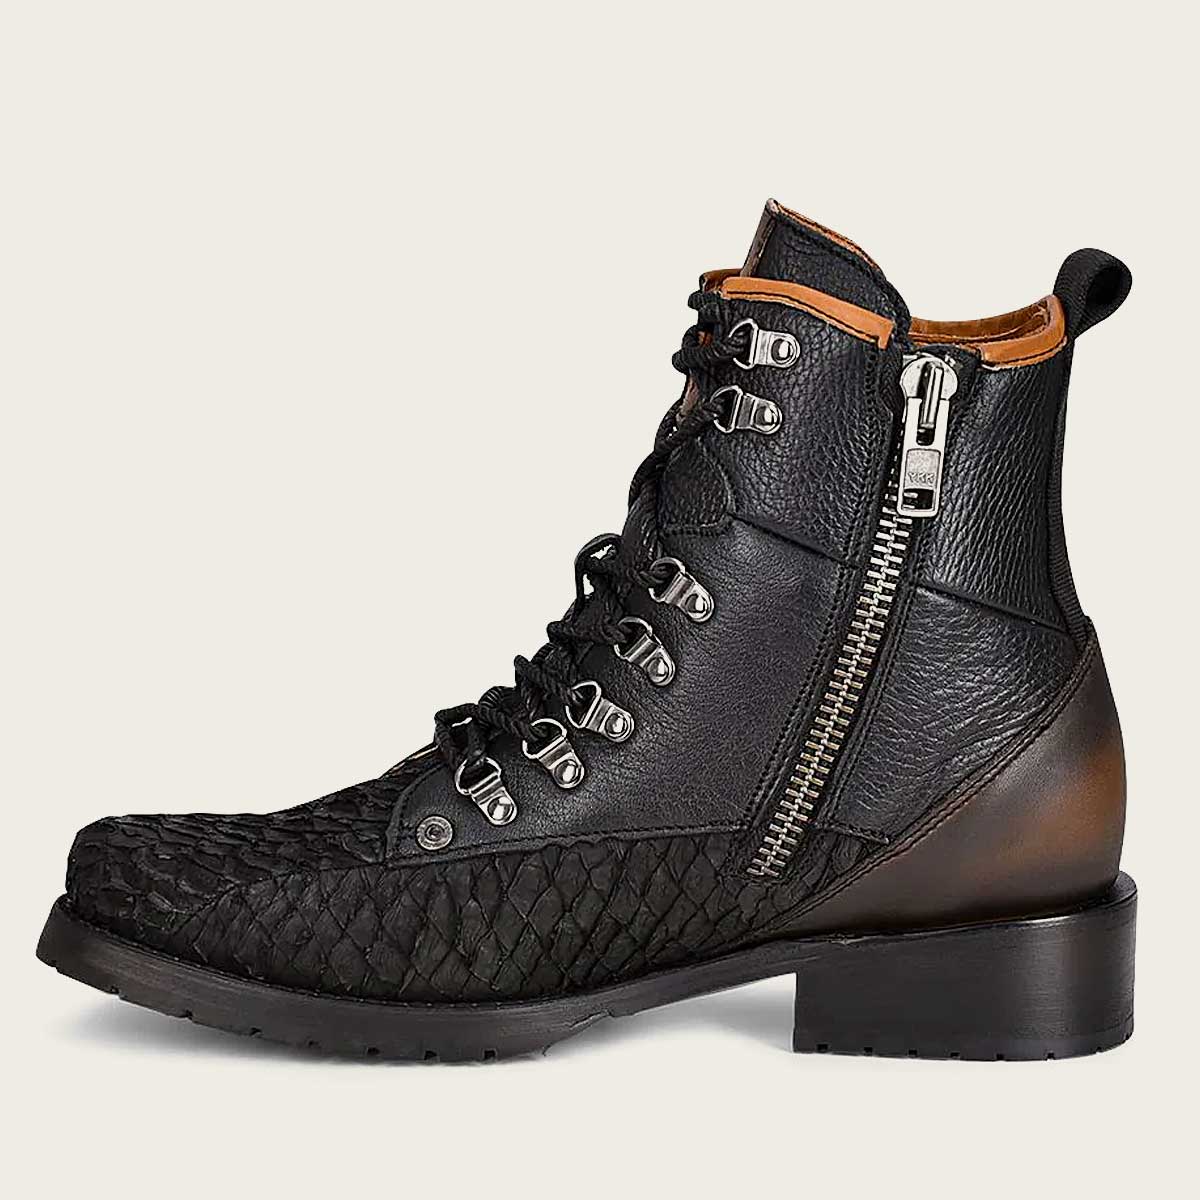 Stylish black poisson leather ankle boots for men, inspired by mining style with metallic accents.